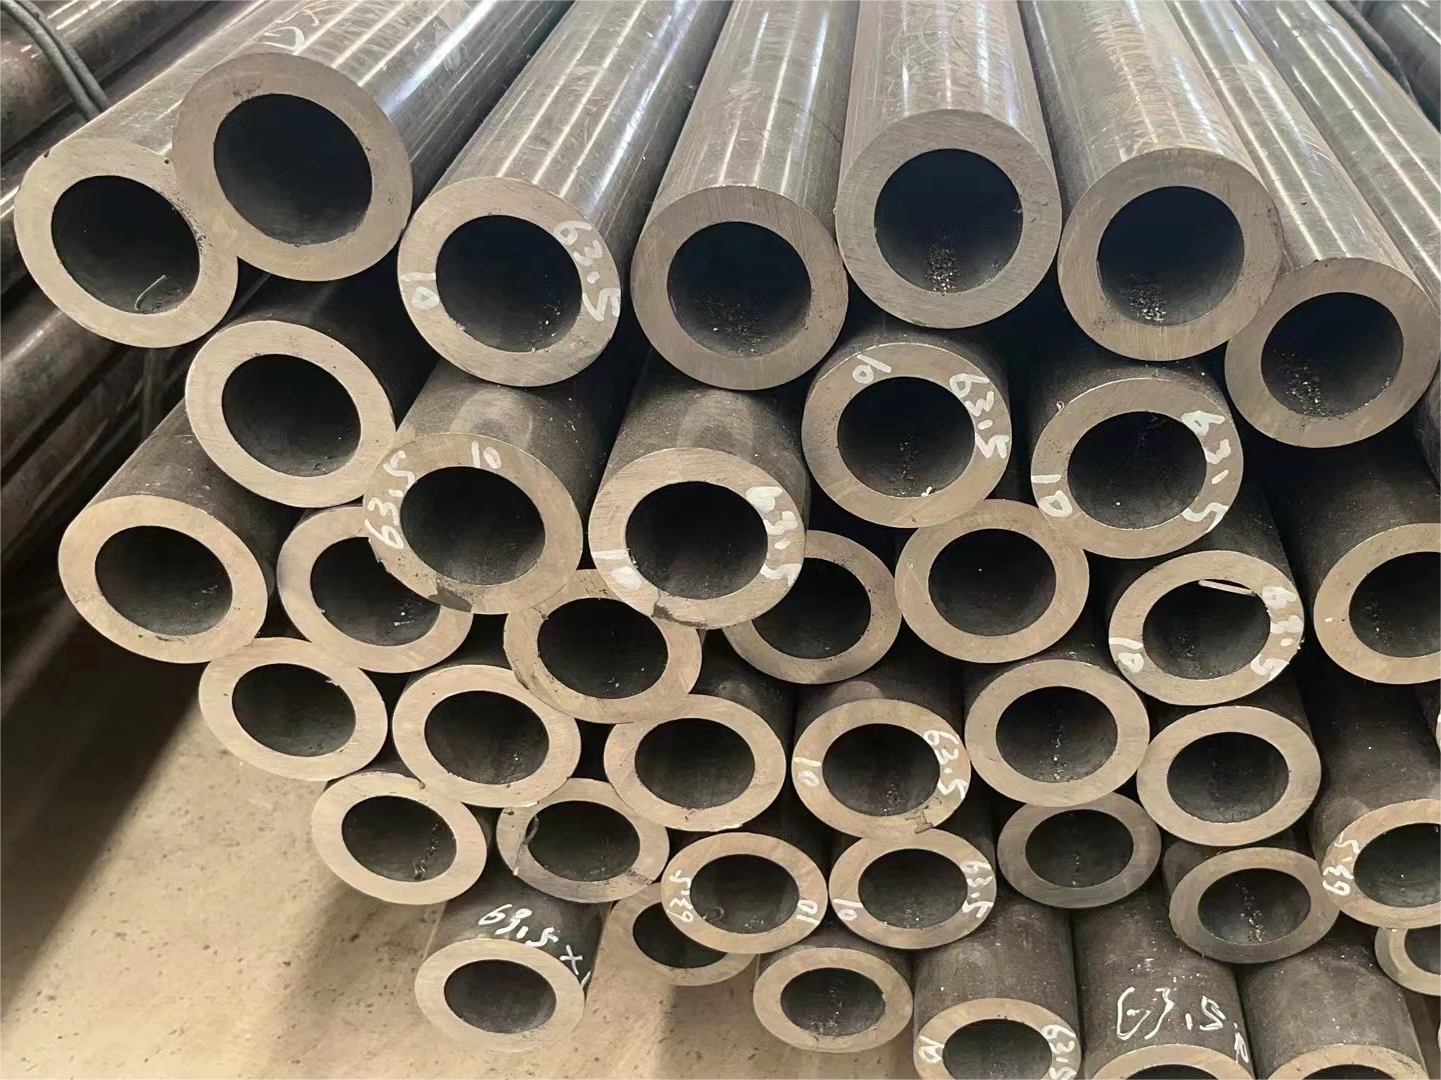 Recent Export of Seamless Steel Pipes to South Korea by Our Company, Meeting ASME SA106 GR.B Stan...